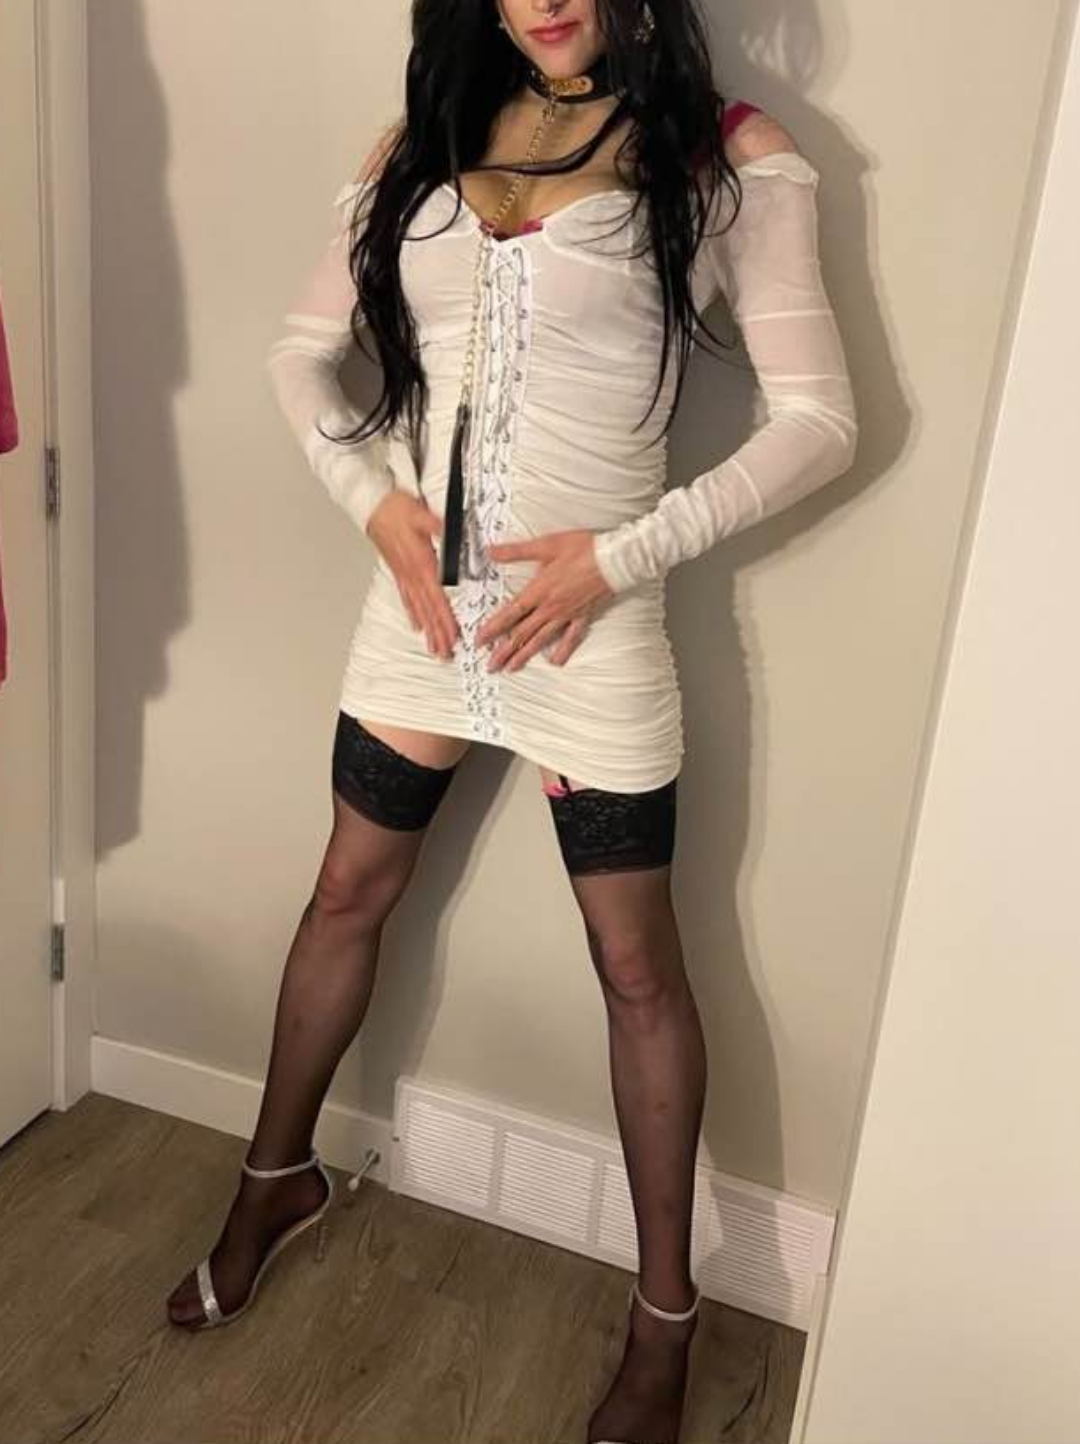 Women's Best - Sissy is looking awesome in her new #WomensBest